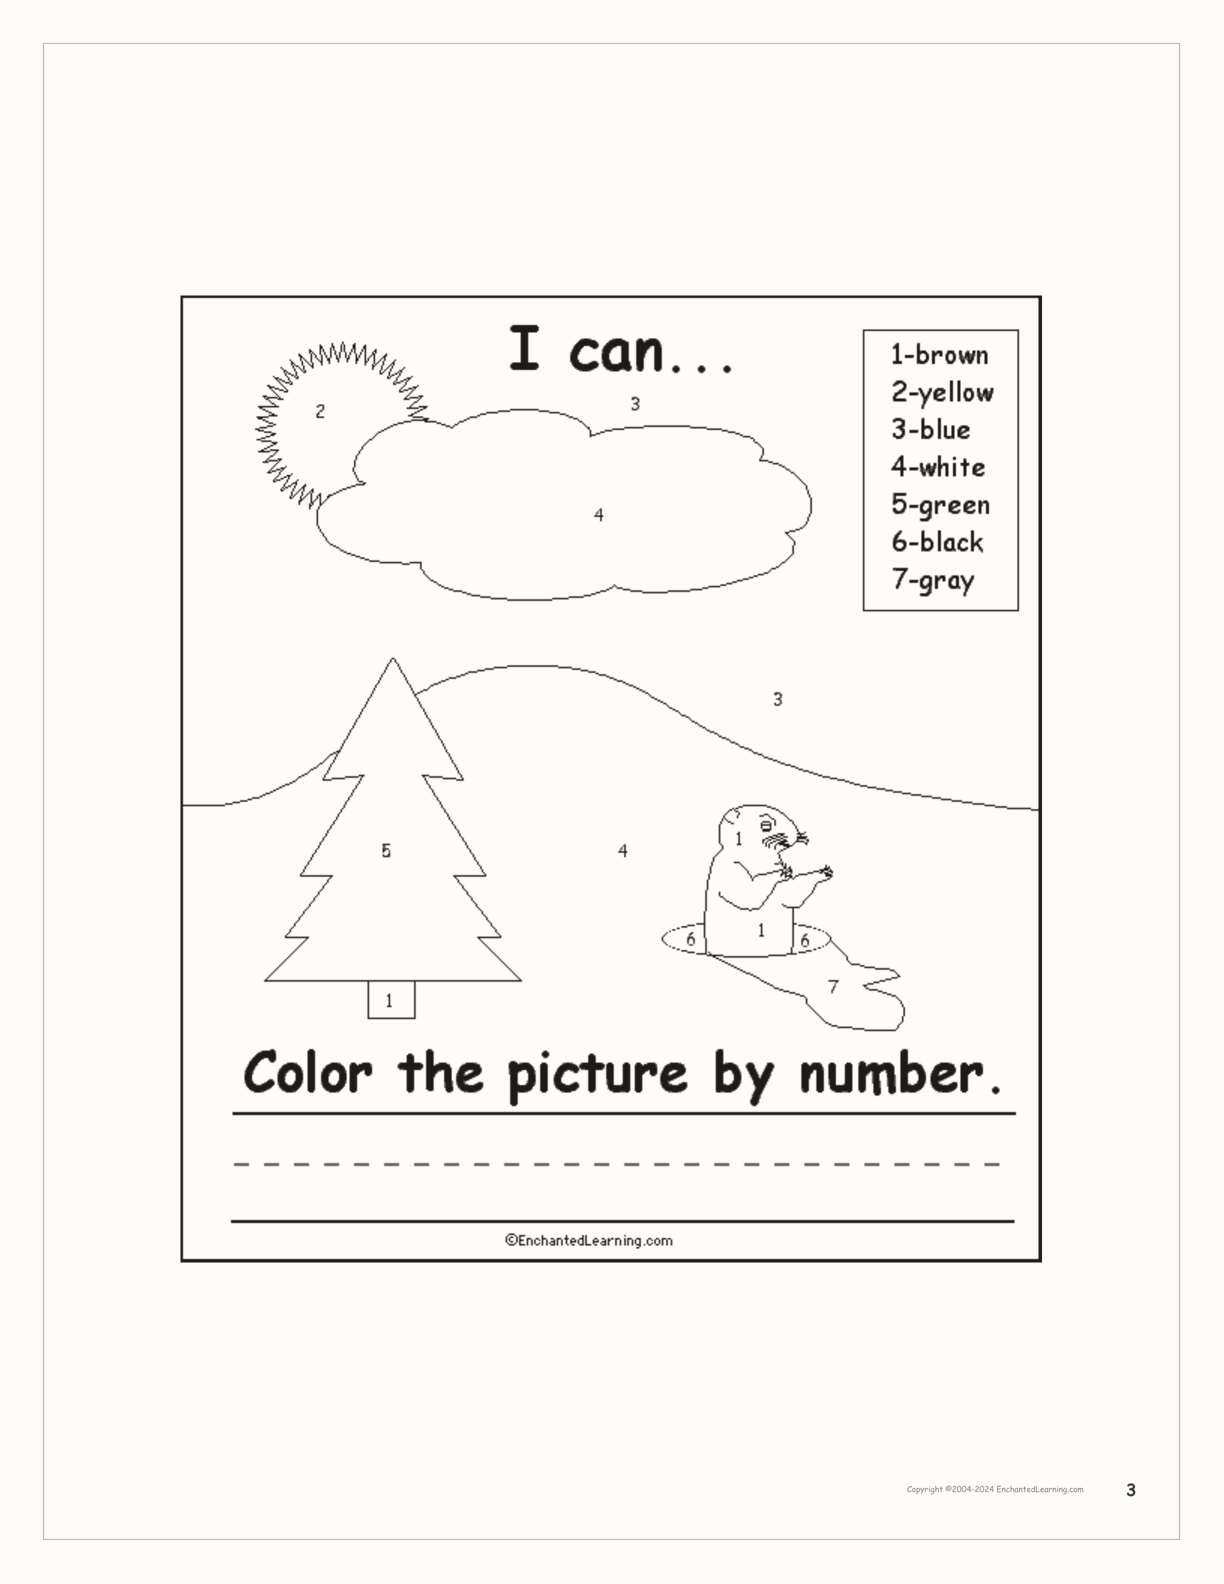 Groundhog Day 'I Can' Book interactive worksheet page 3